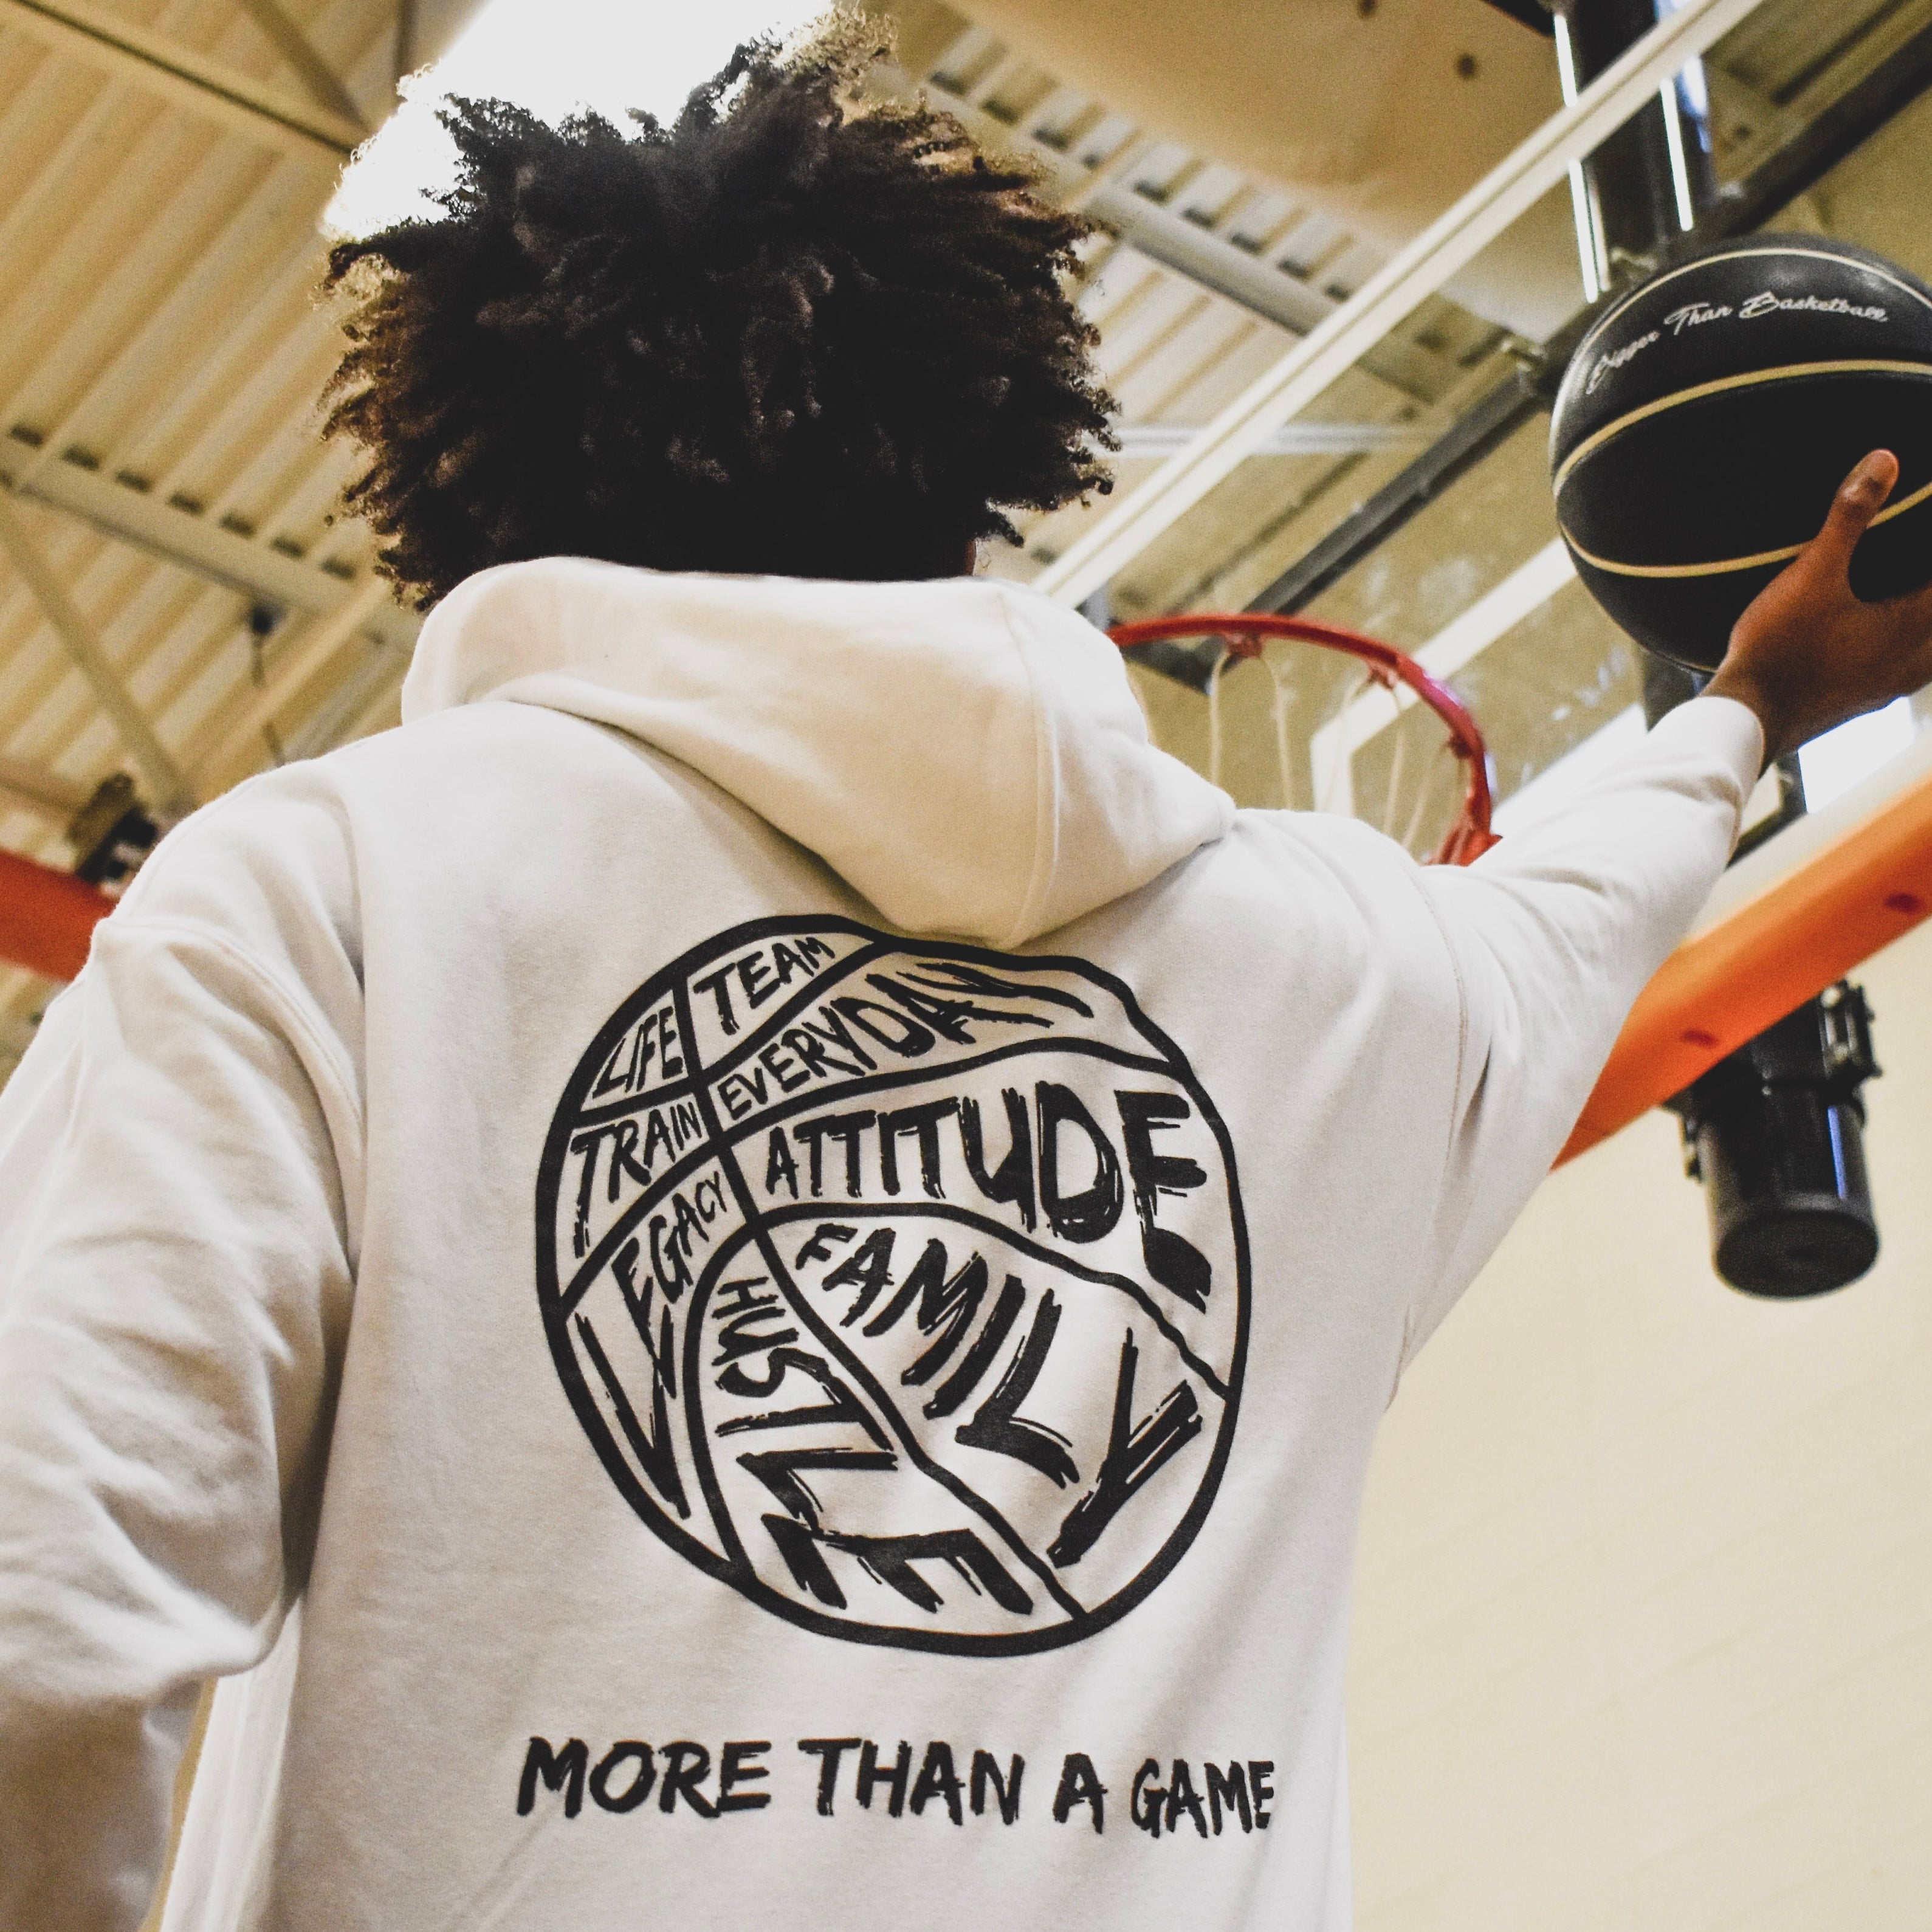 More Than A Game Hoodie - Youth - White